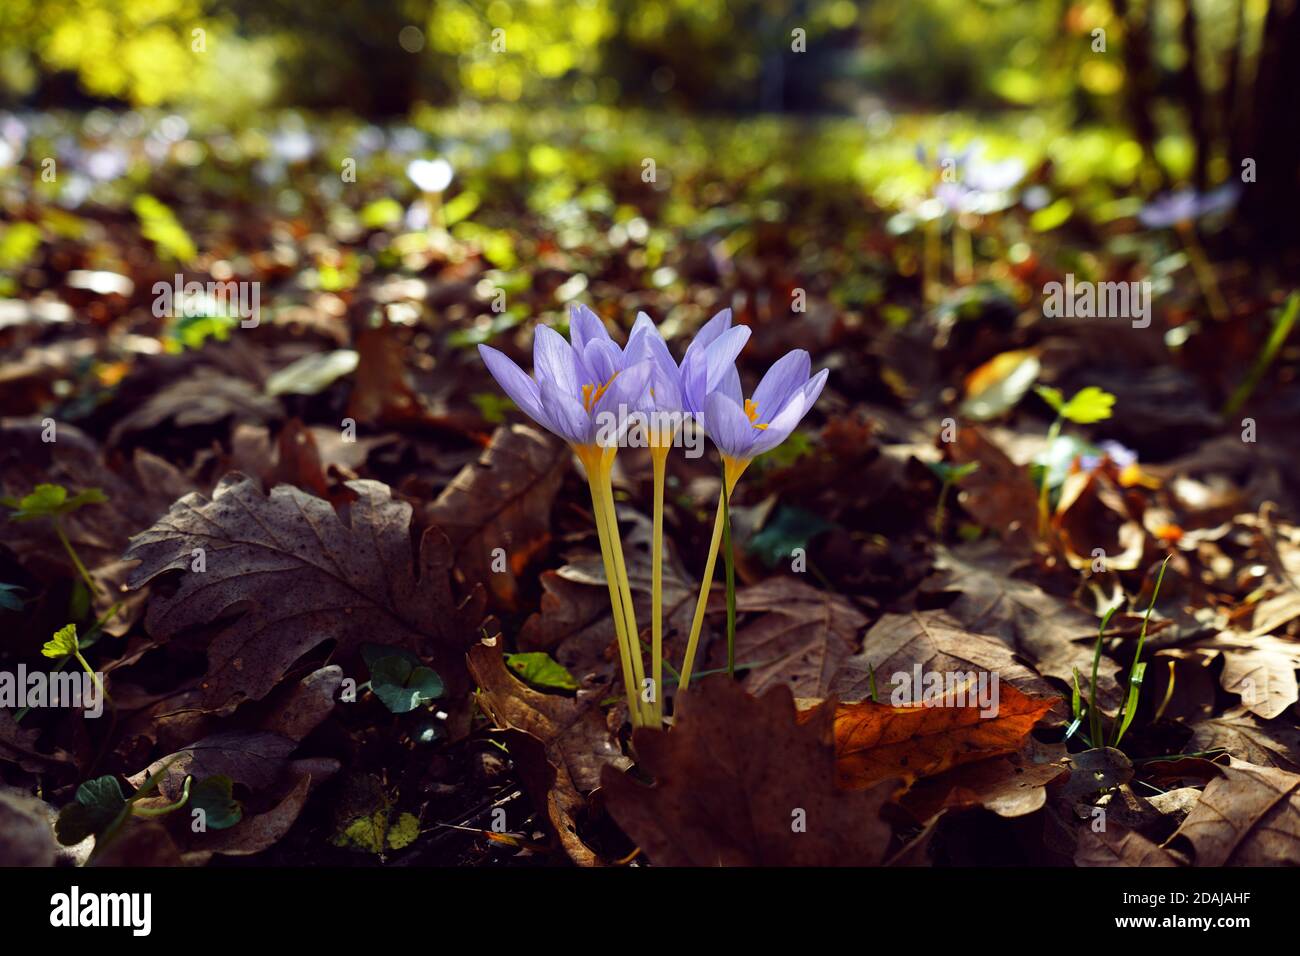 Purple flower surrounded by leaves. Stock Photo